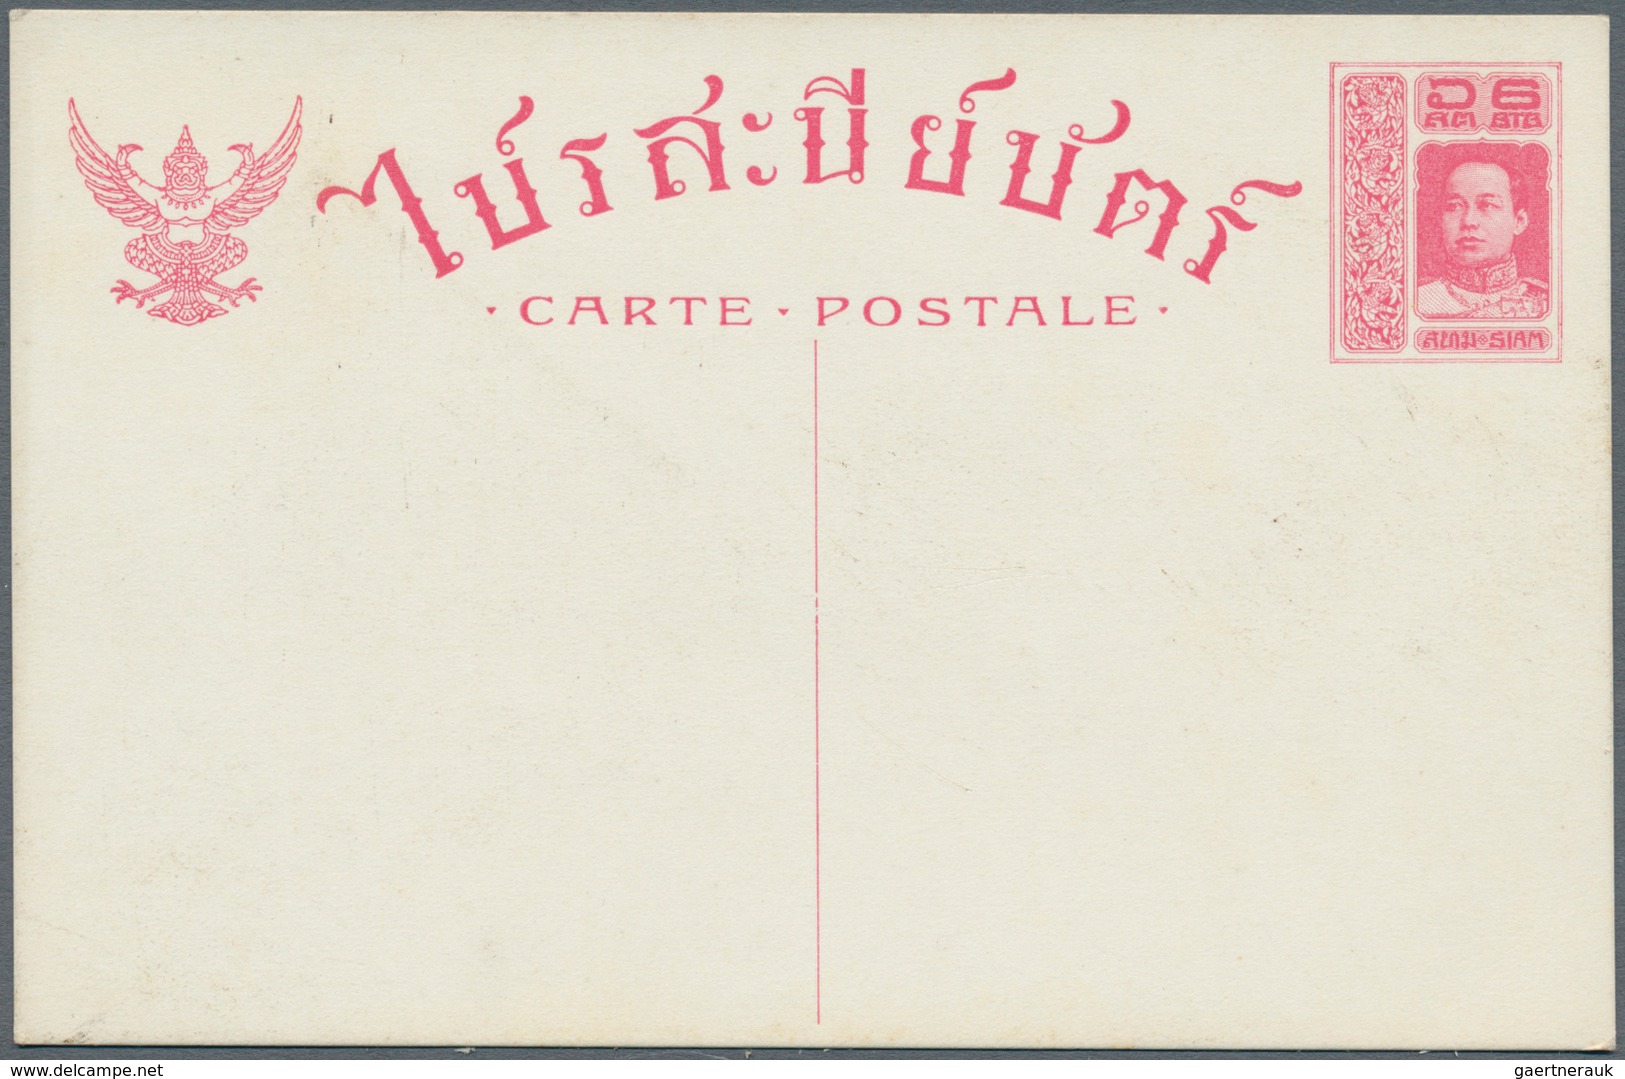 Thailand - Ganzsachen: 1914, stationery cards 2 S., 3 S., 6 S. and 6 S.+6 S. (3) unused mint. Merely